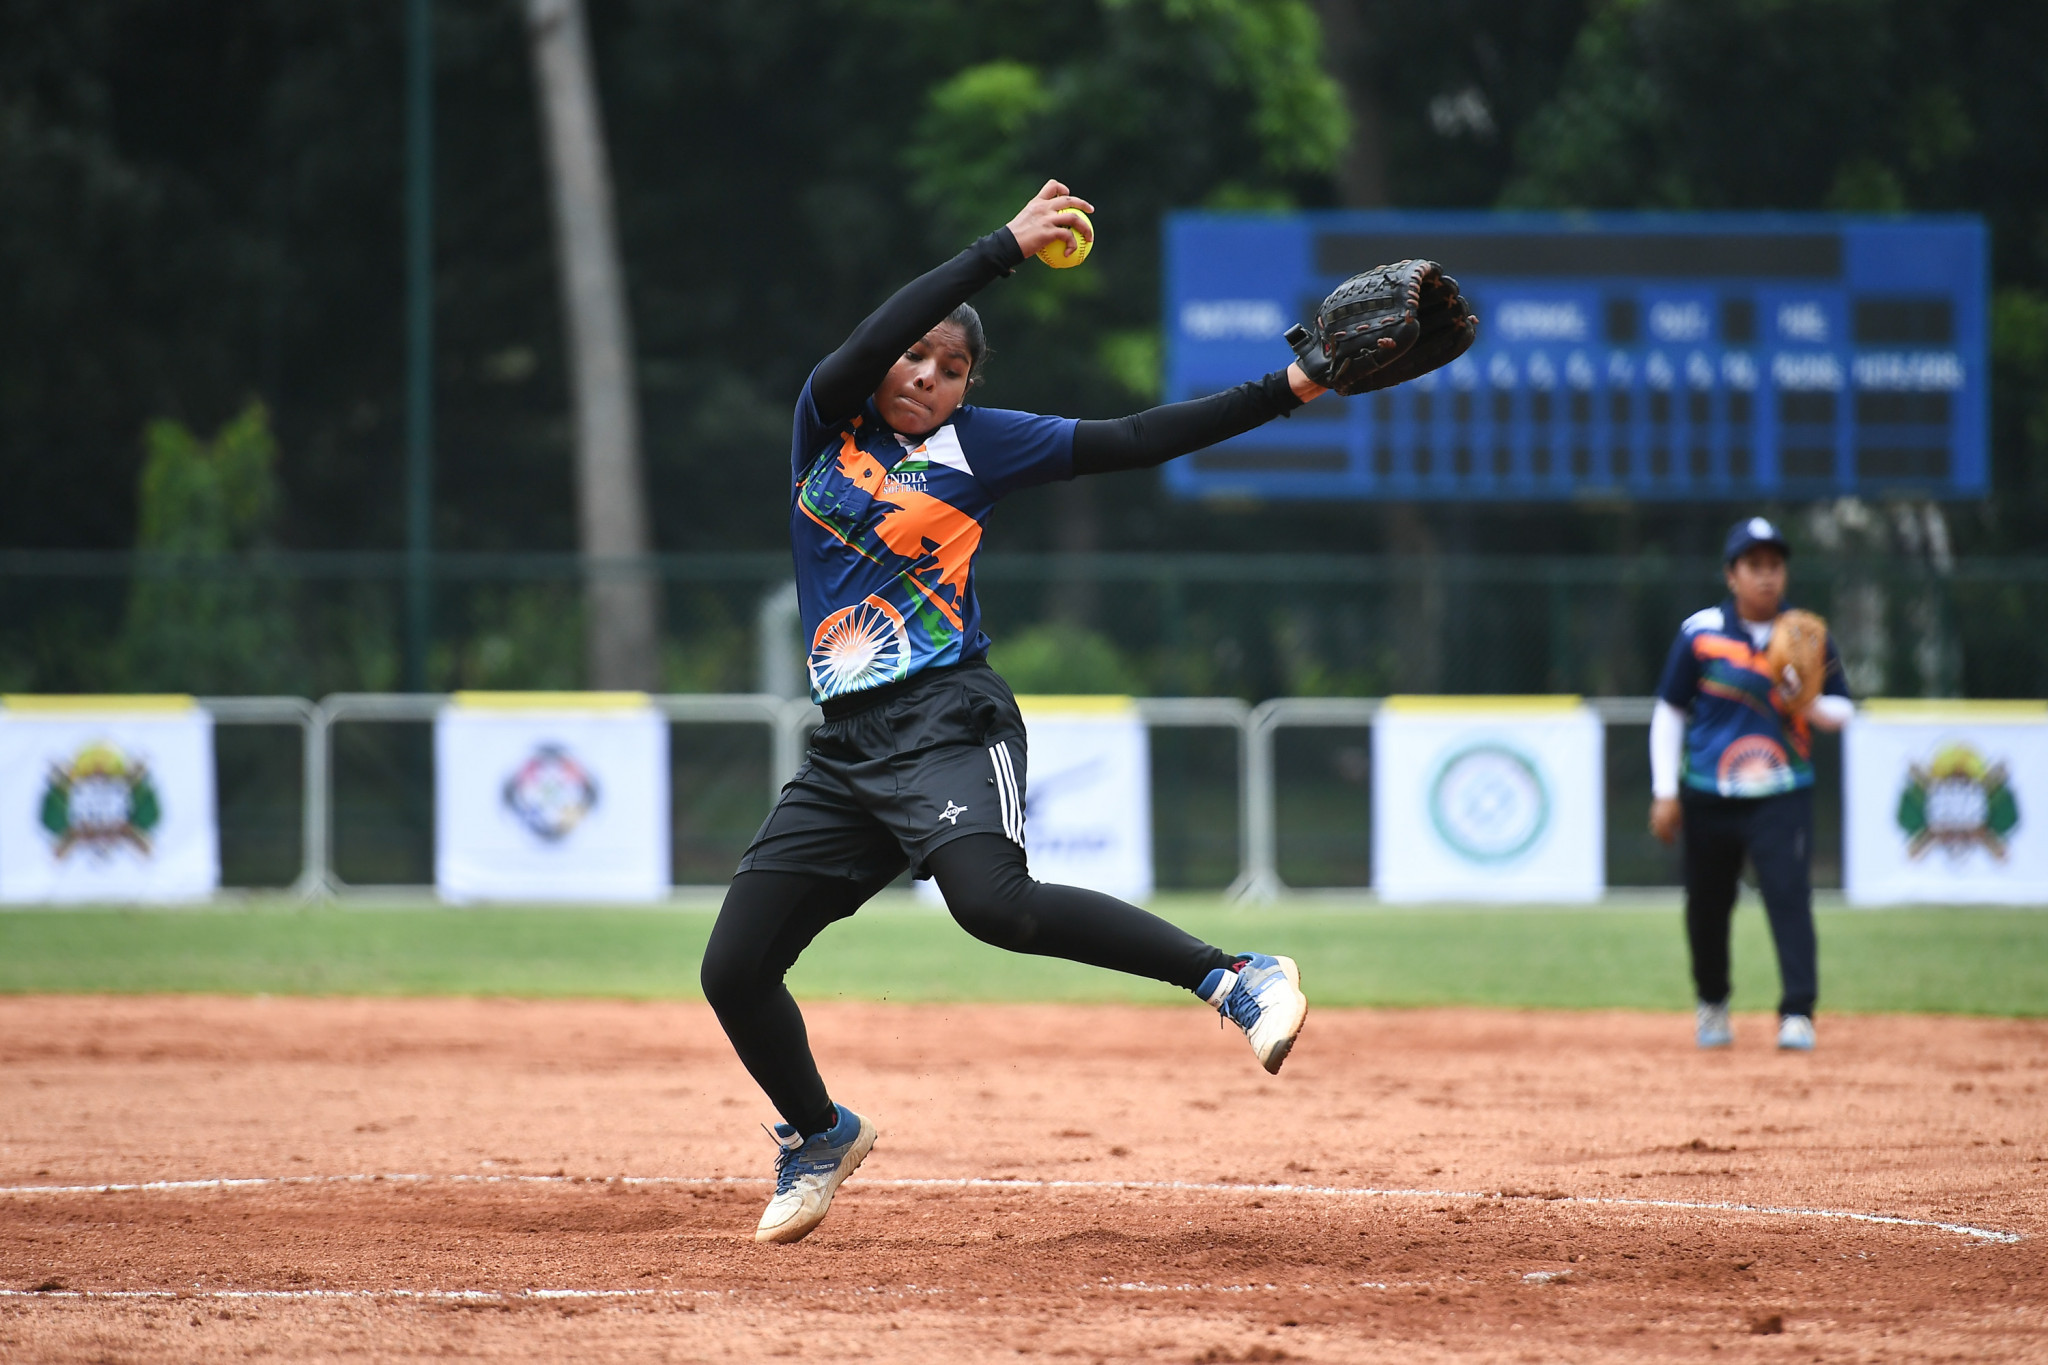 India played at the 2019 Asian Women's Softball Championship in Indonesia, but did not win a game ©Getty Images